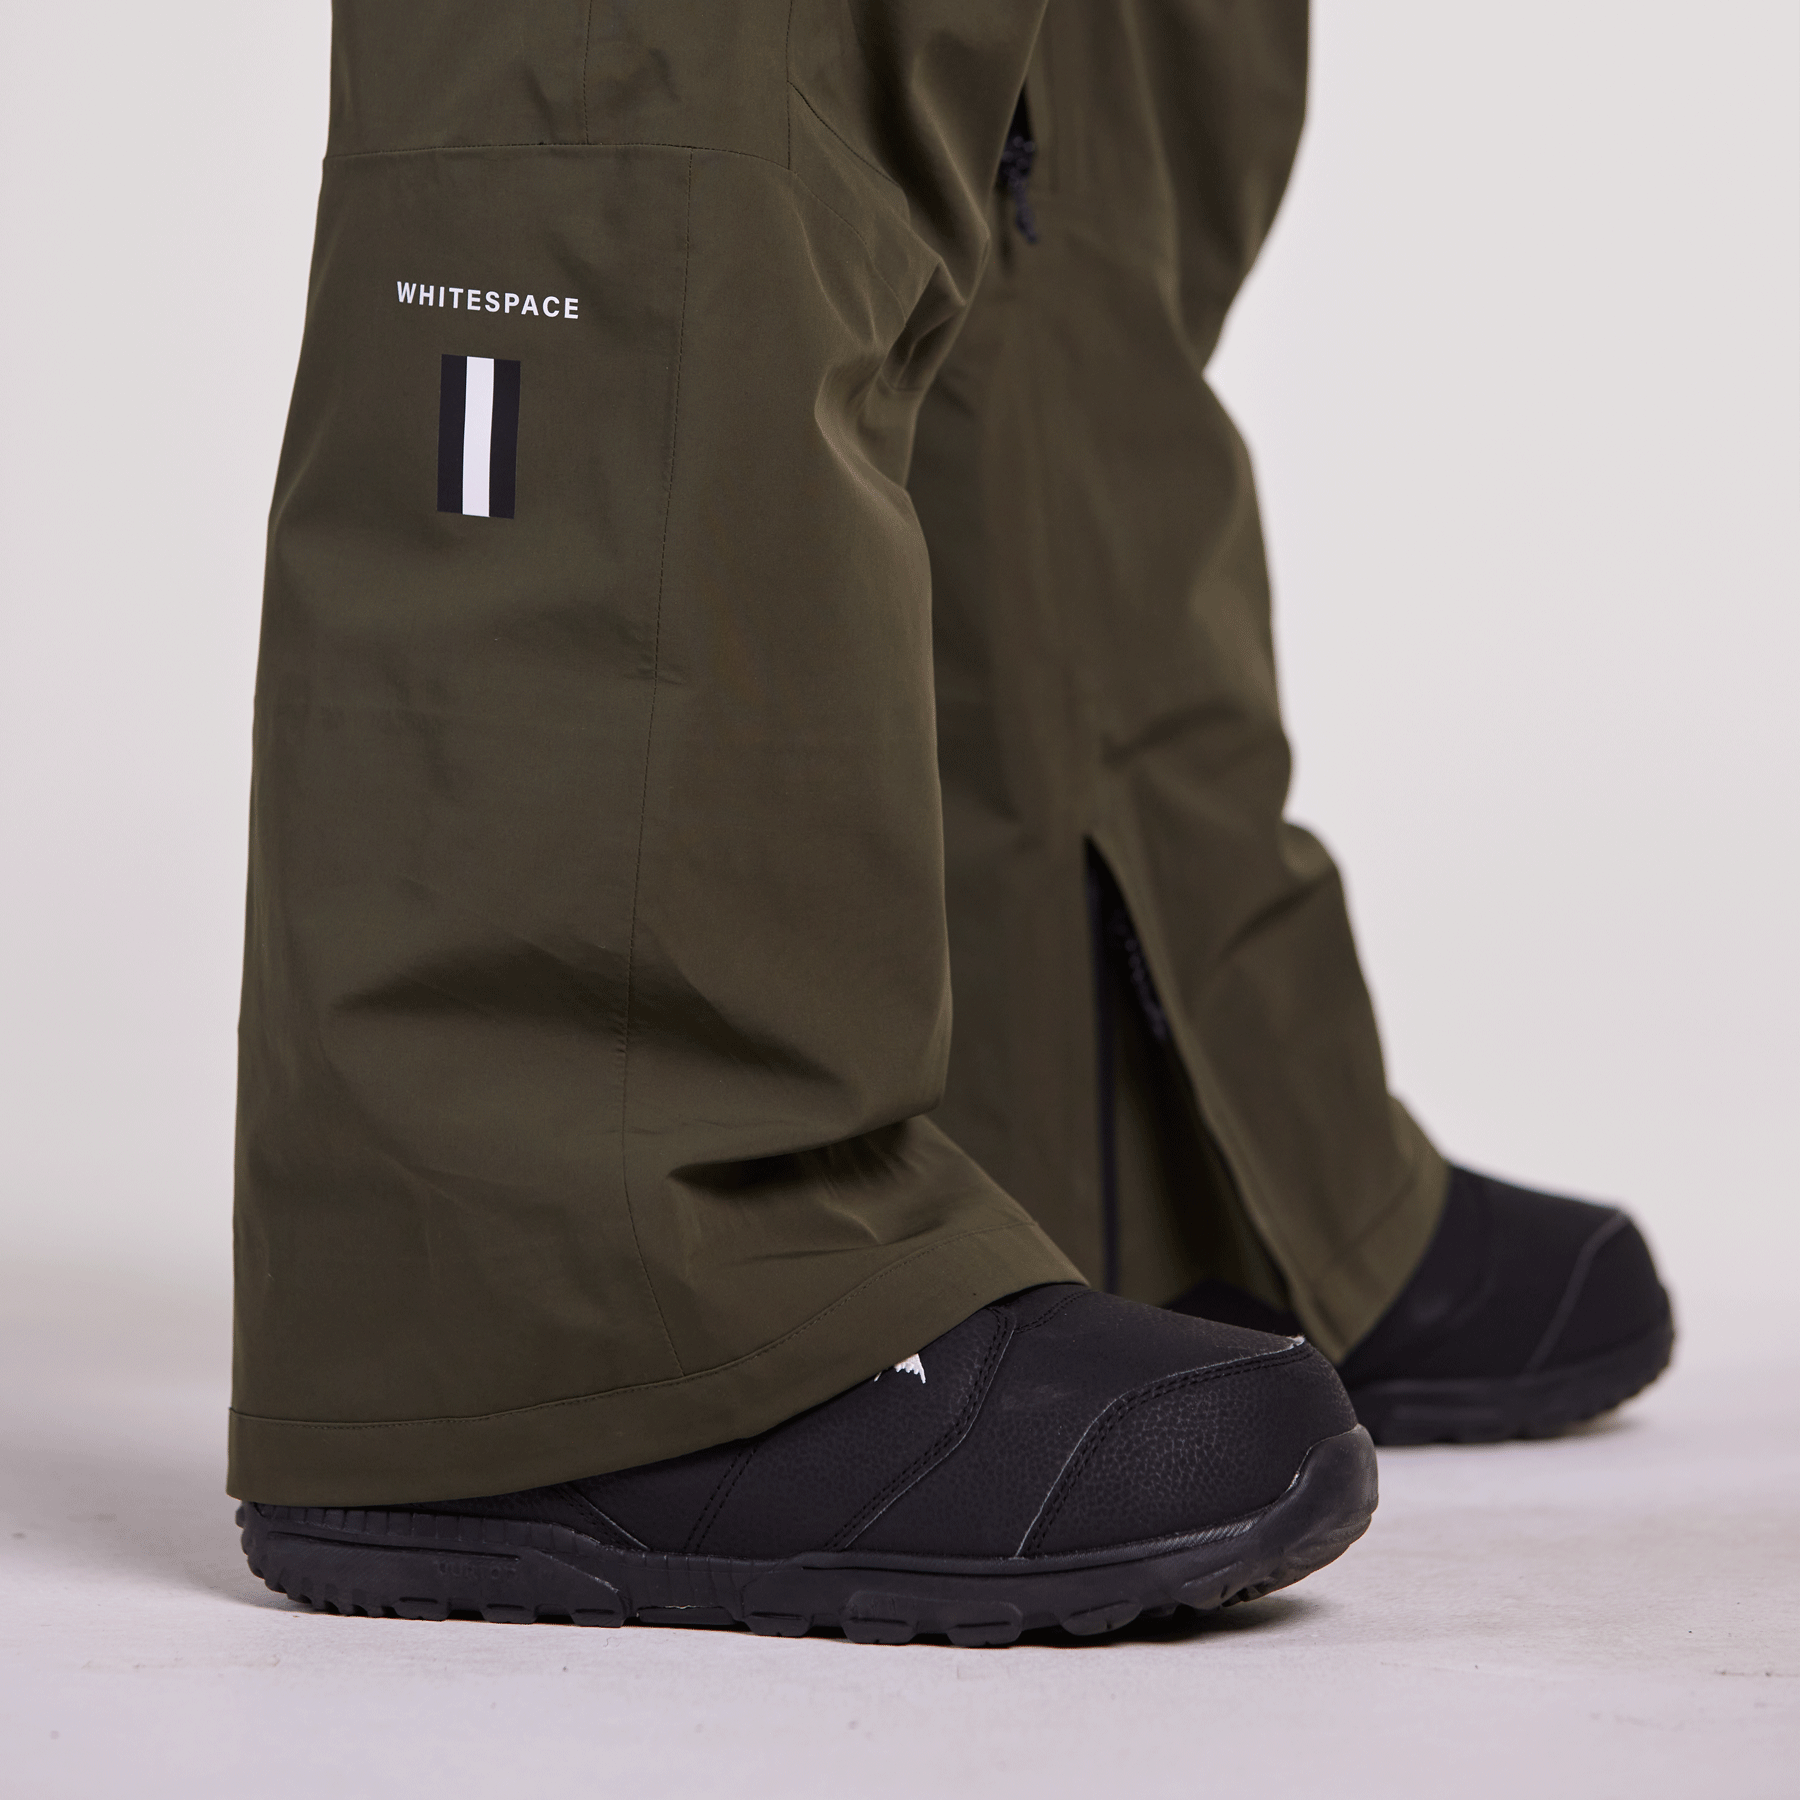 3L Performance Pant - Forest Green